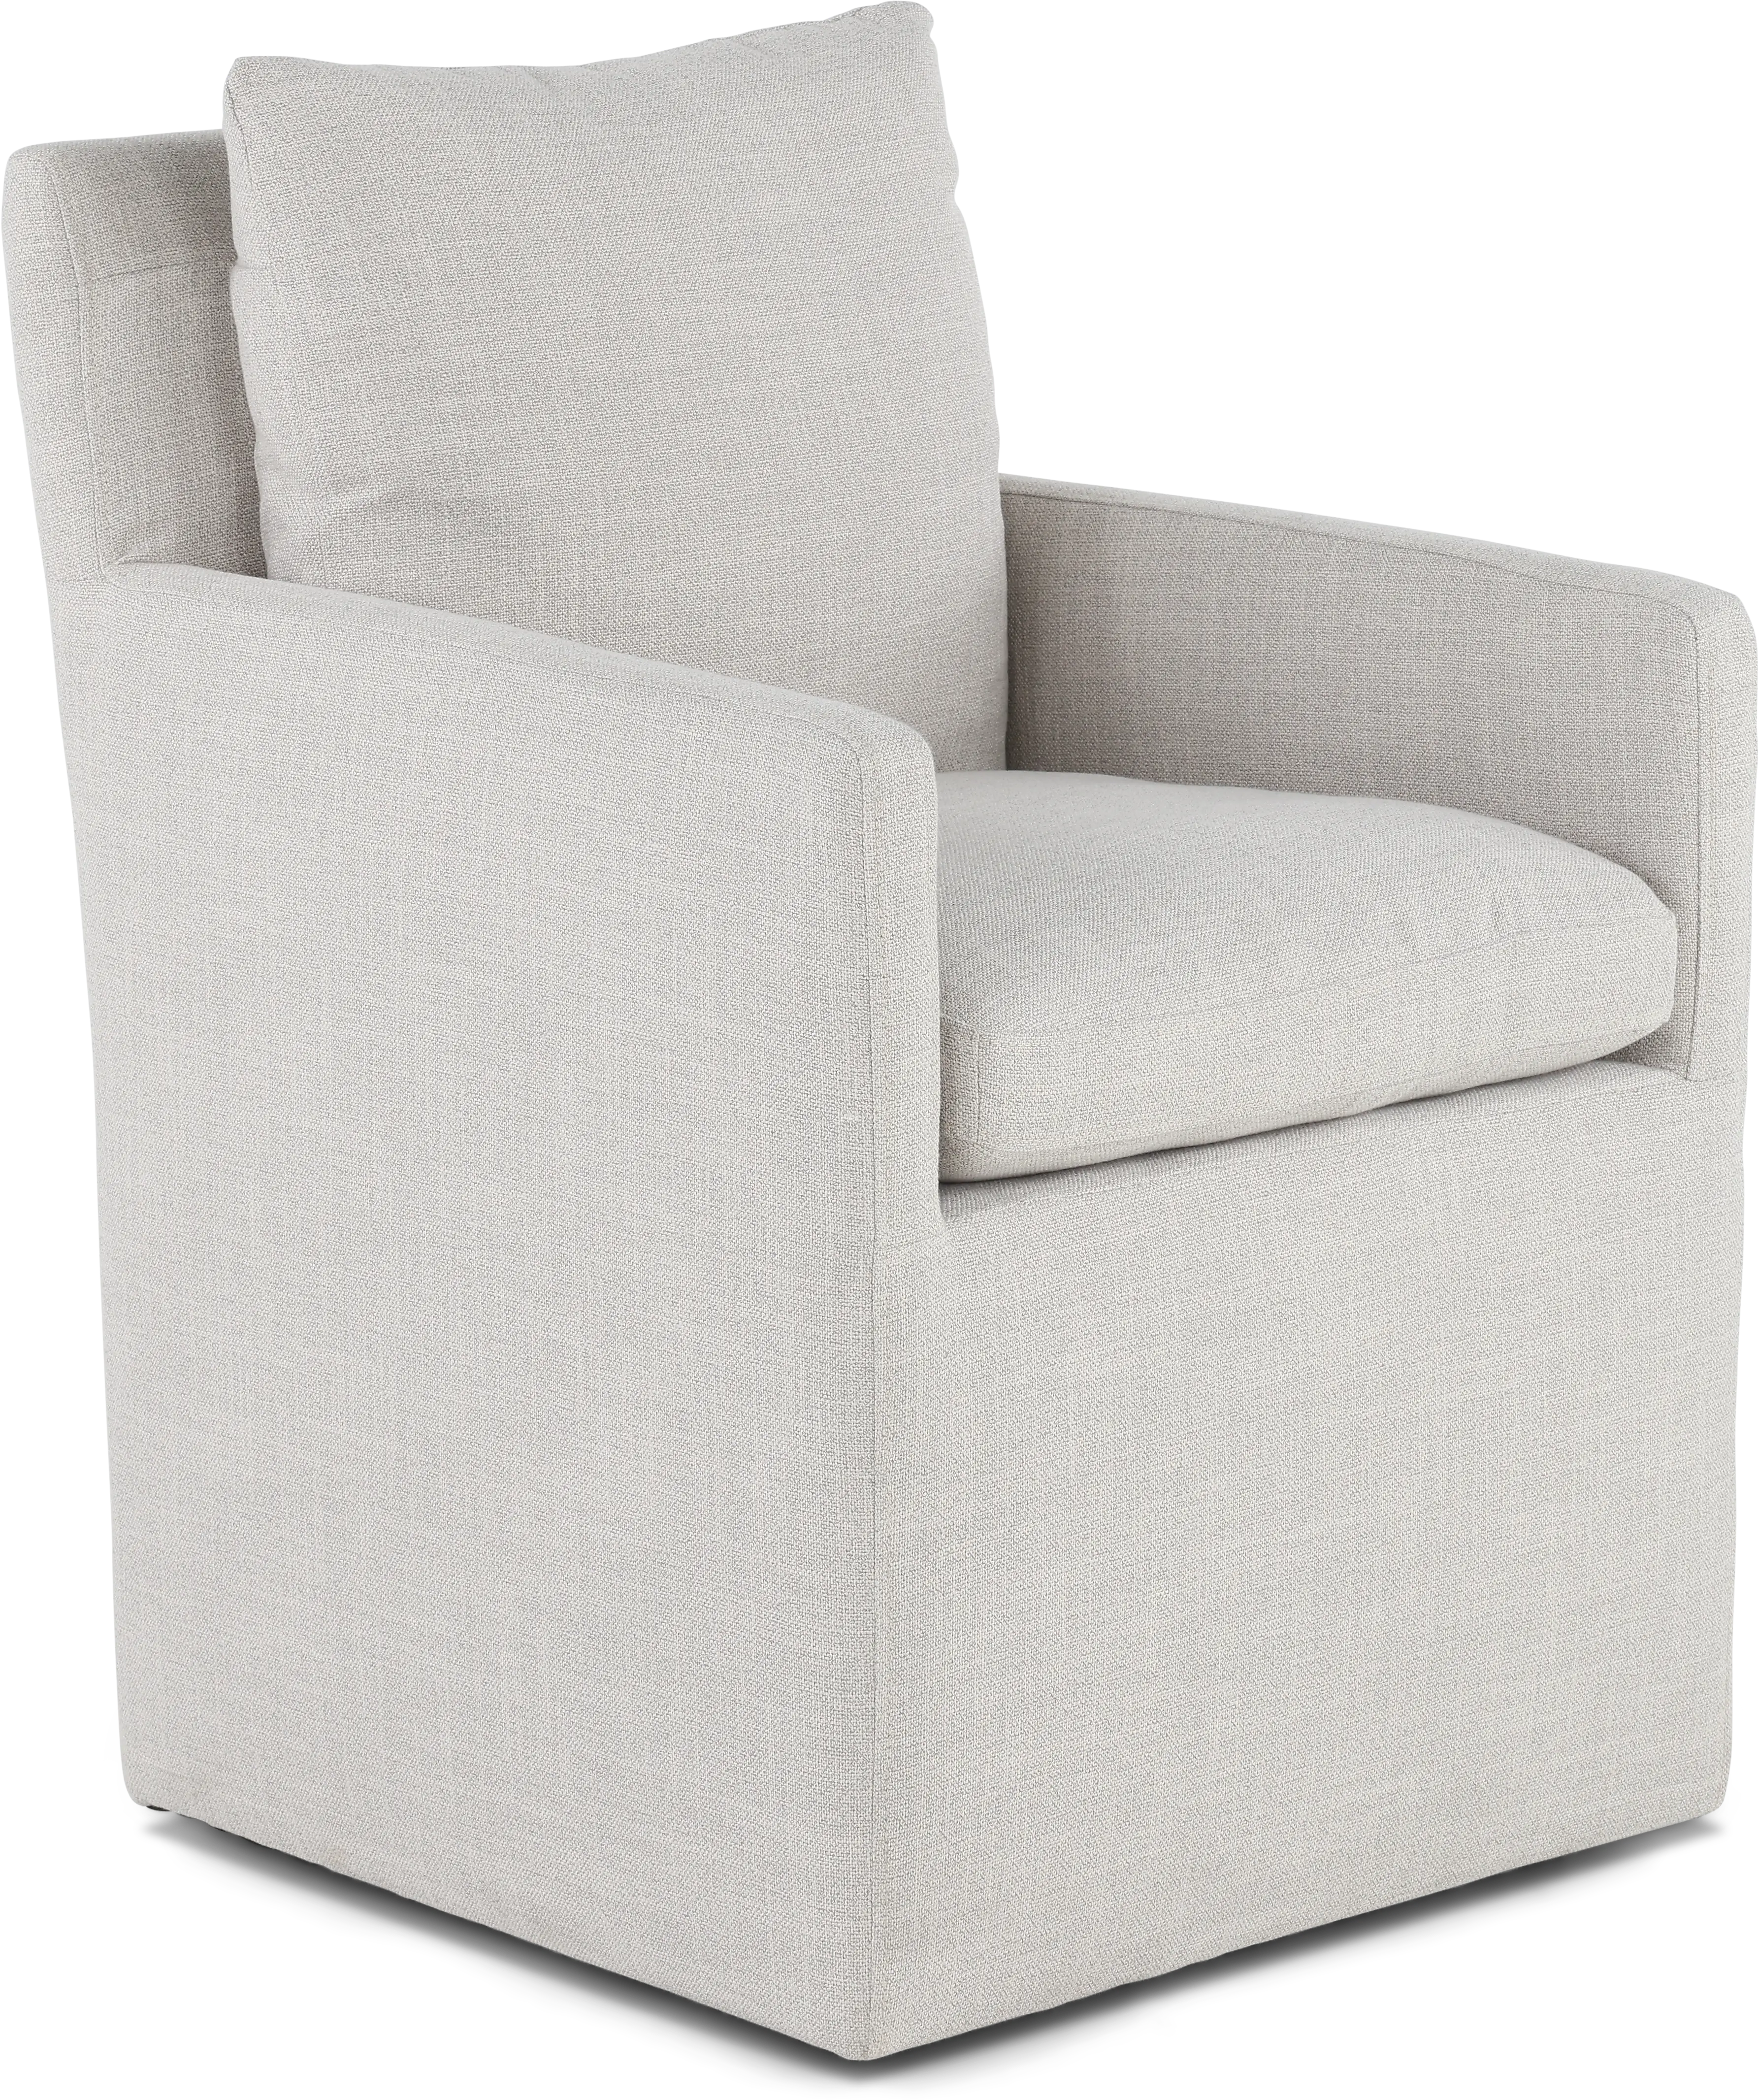 Effie Pale Gray Upholstered Dining Chair